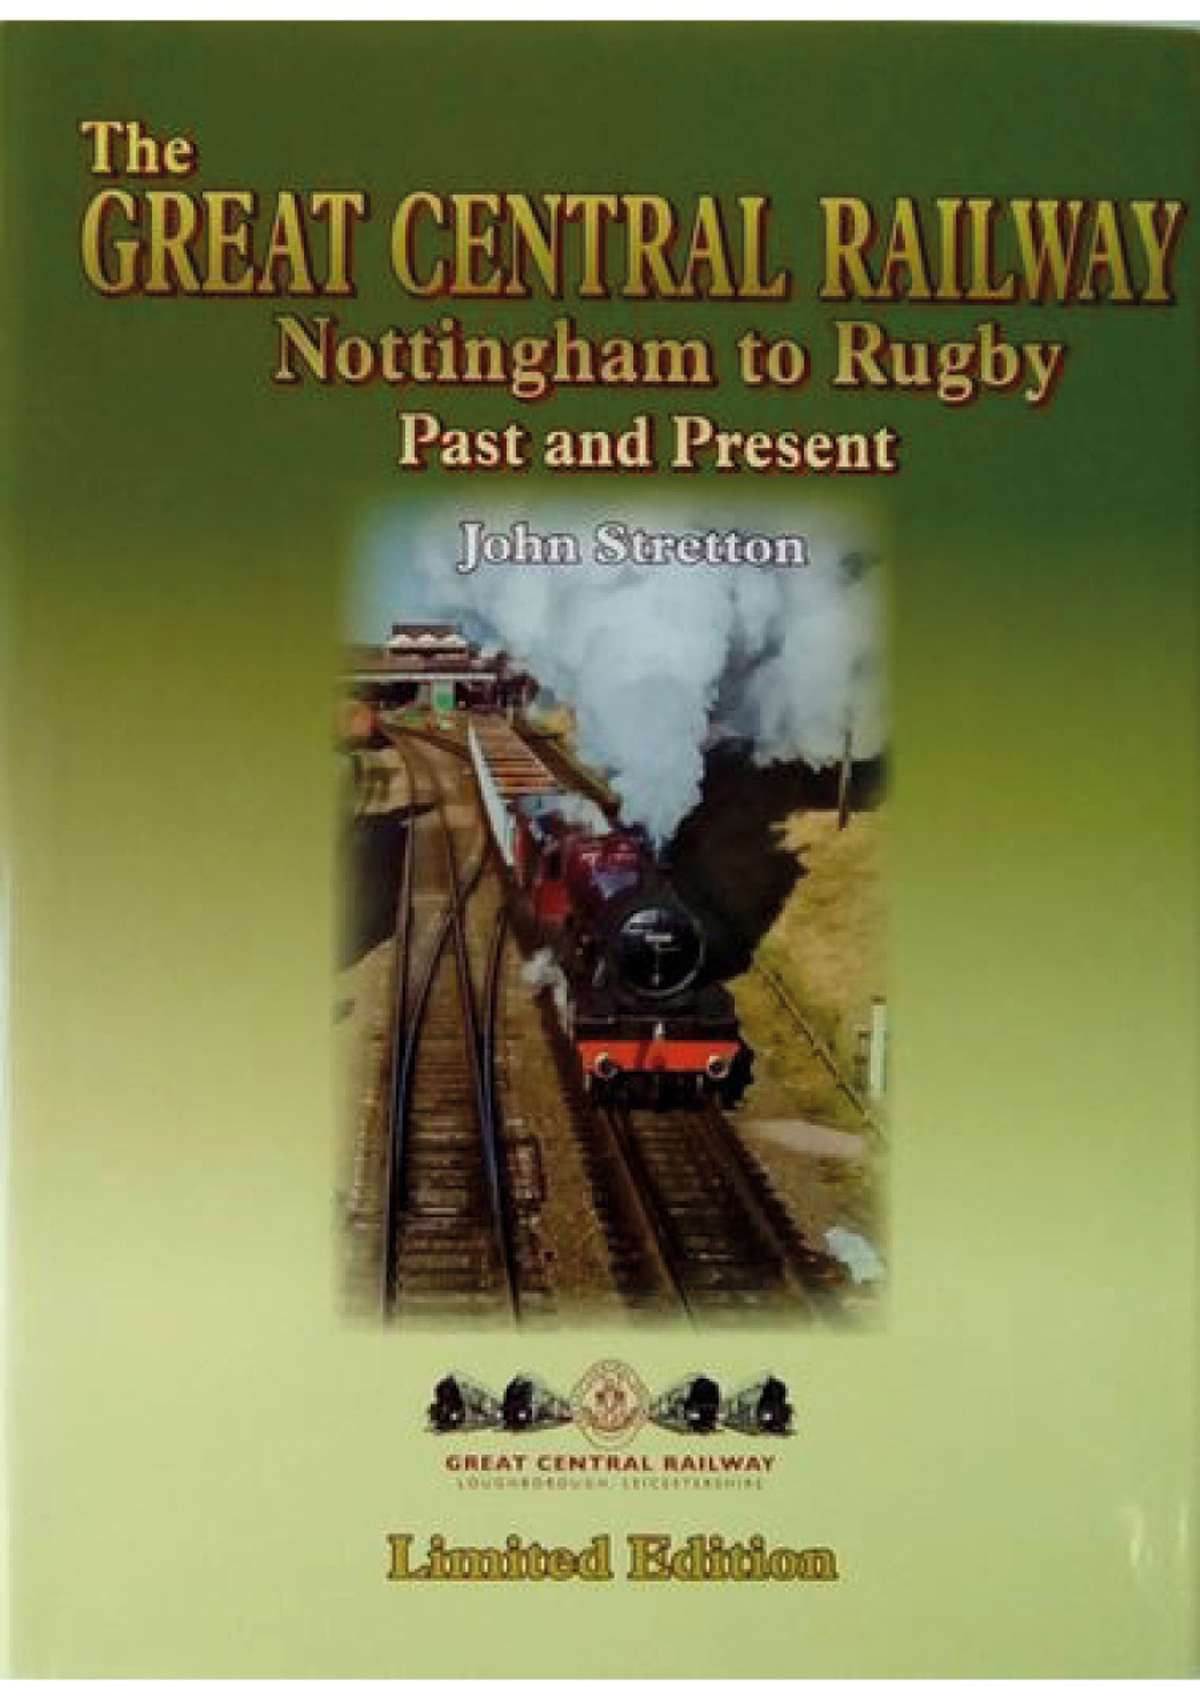 The Great Central Railway Nottingham to Rugby